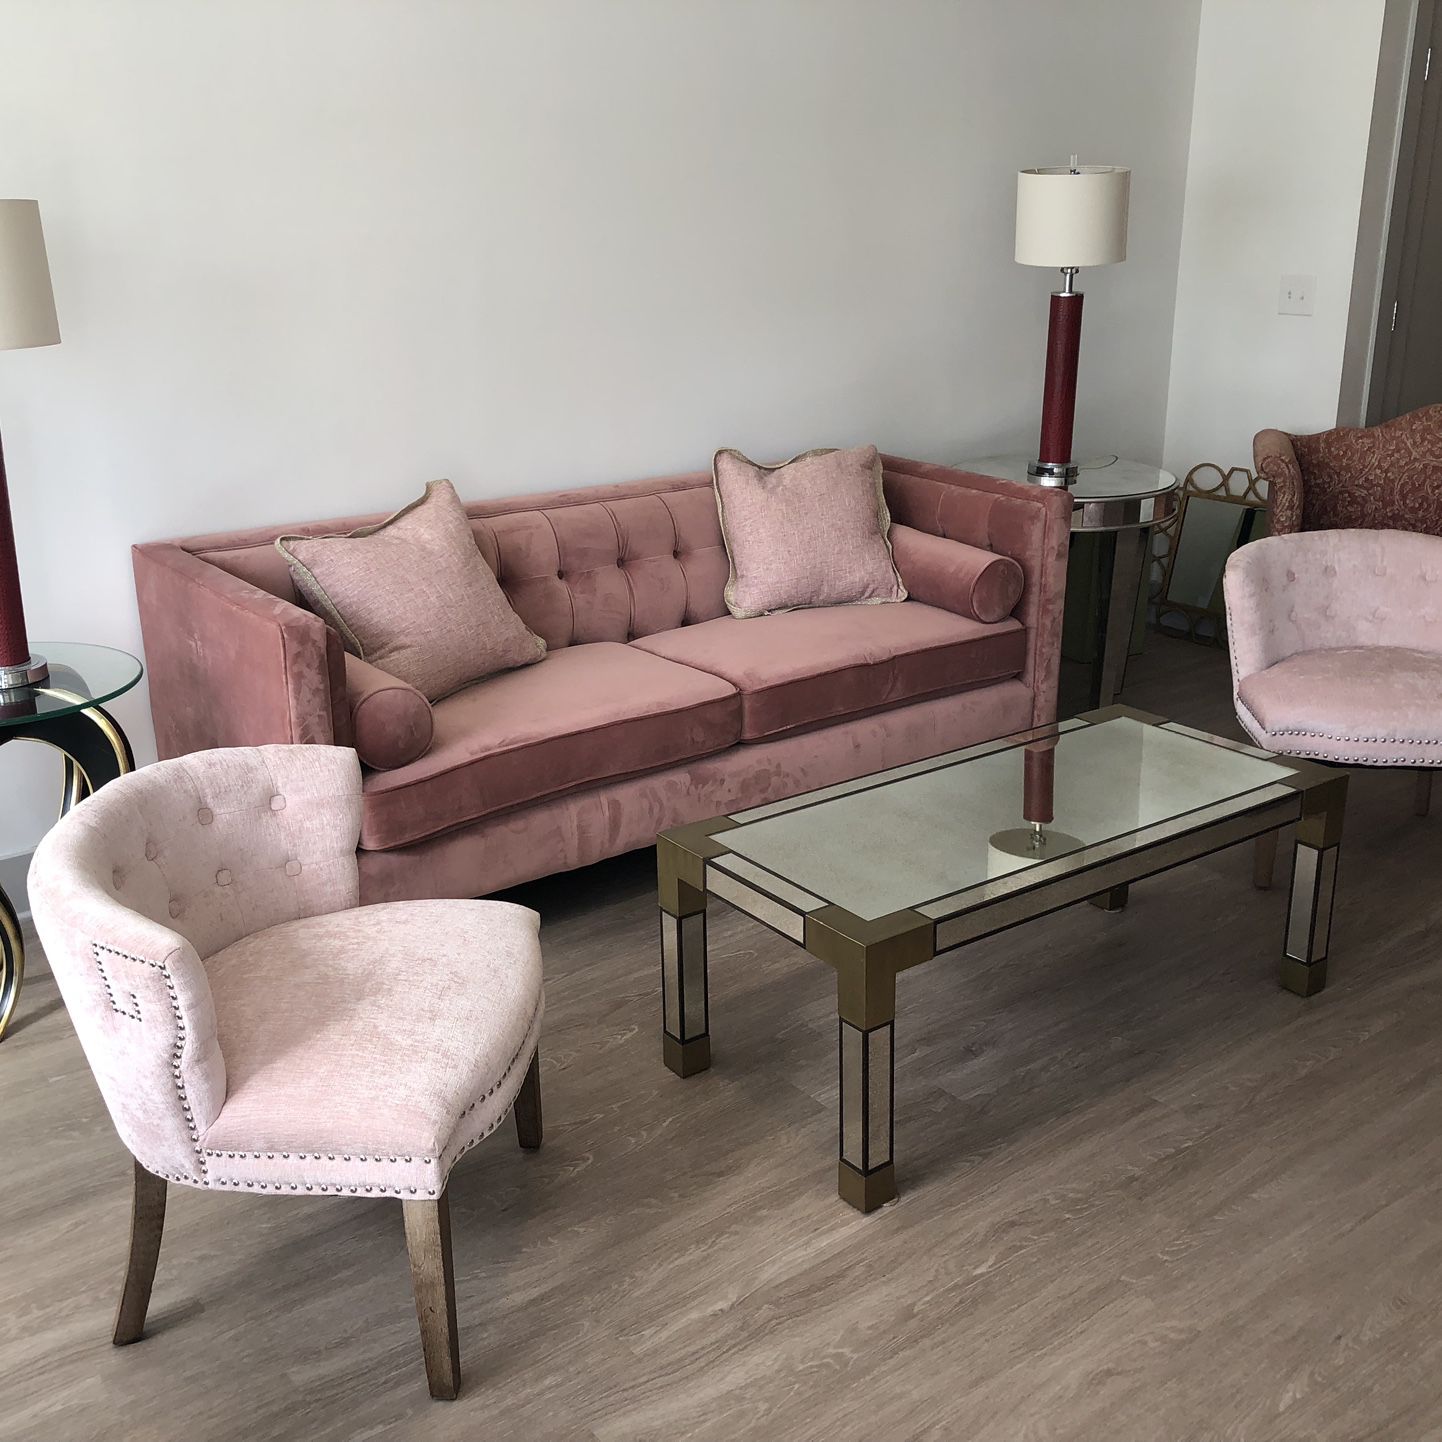 Dusty Pink Sofa ($250) & More Living Room/Dining Room Furniture For Sale